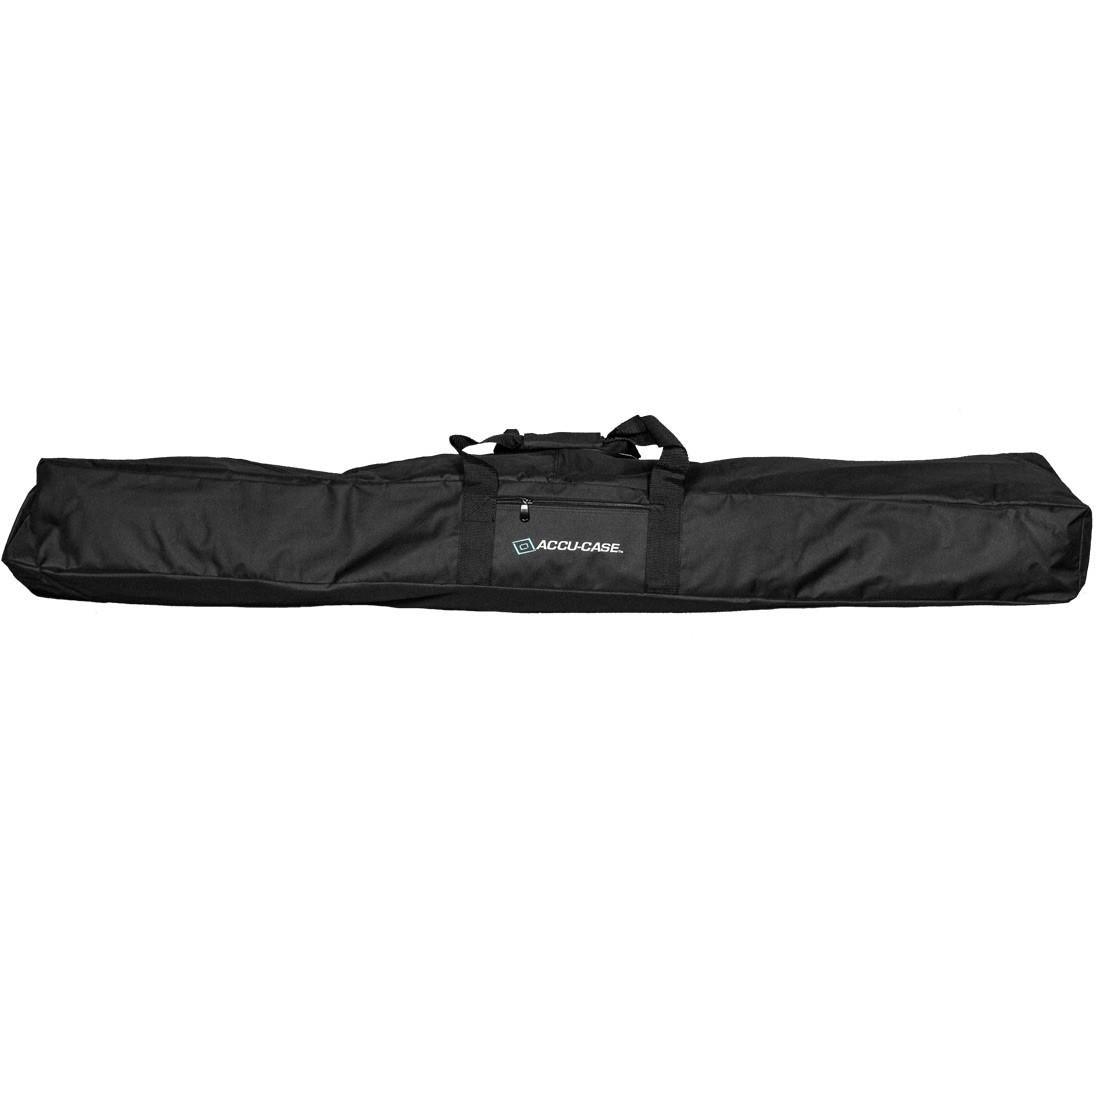 Accu Case ASC-AC-63 Carry Bag Case for 2 x Lighting Stands - DY Pro Audio